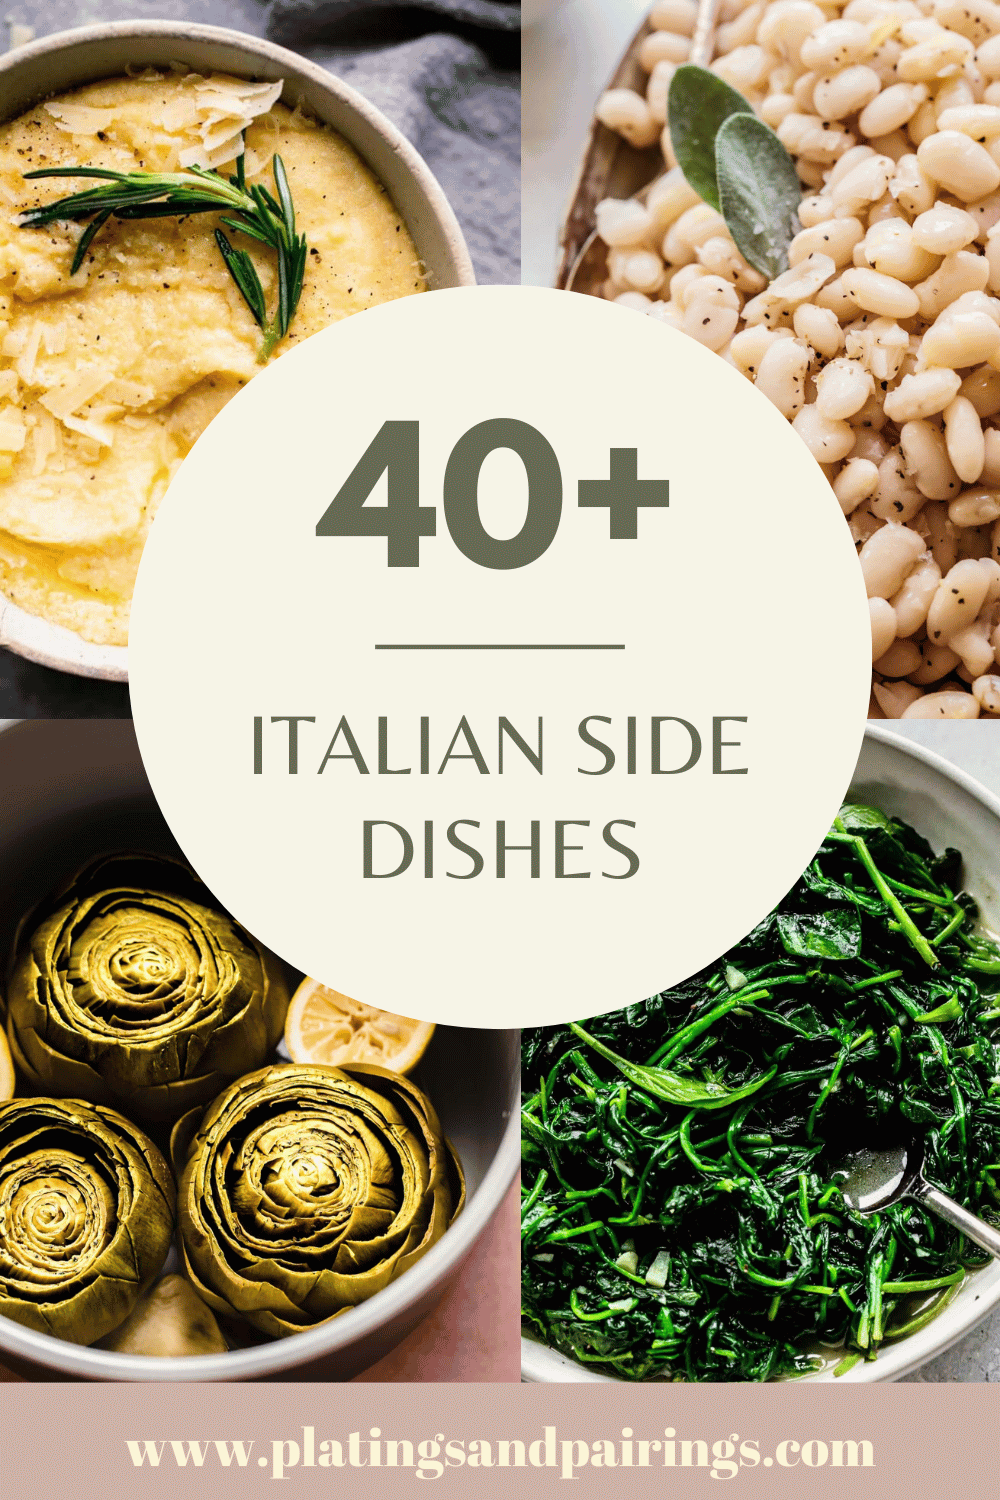 Collage of Italian side dishes with text overlay.